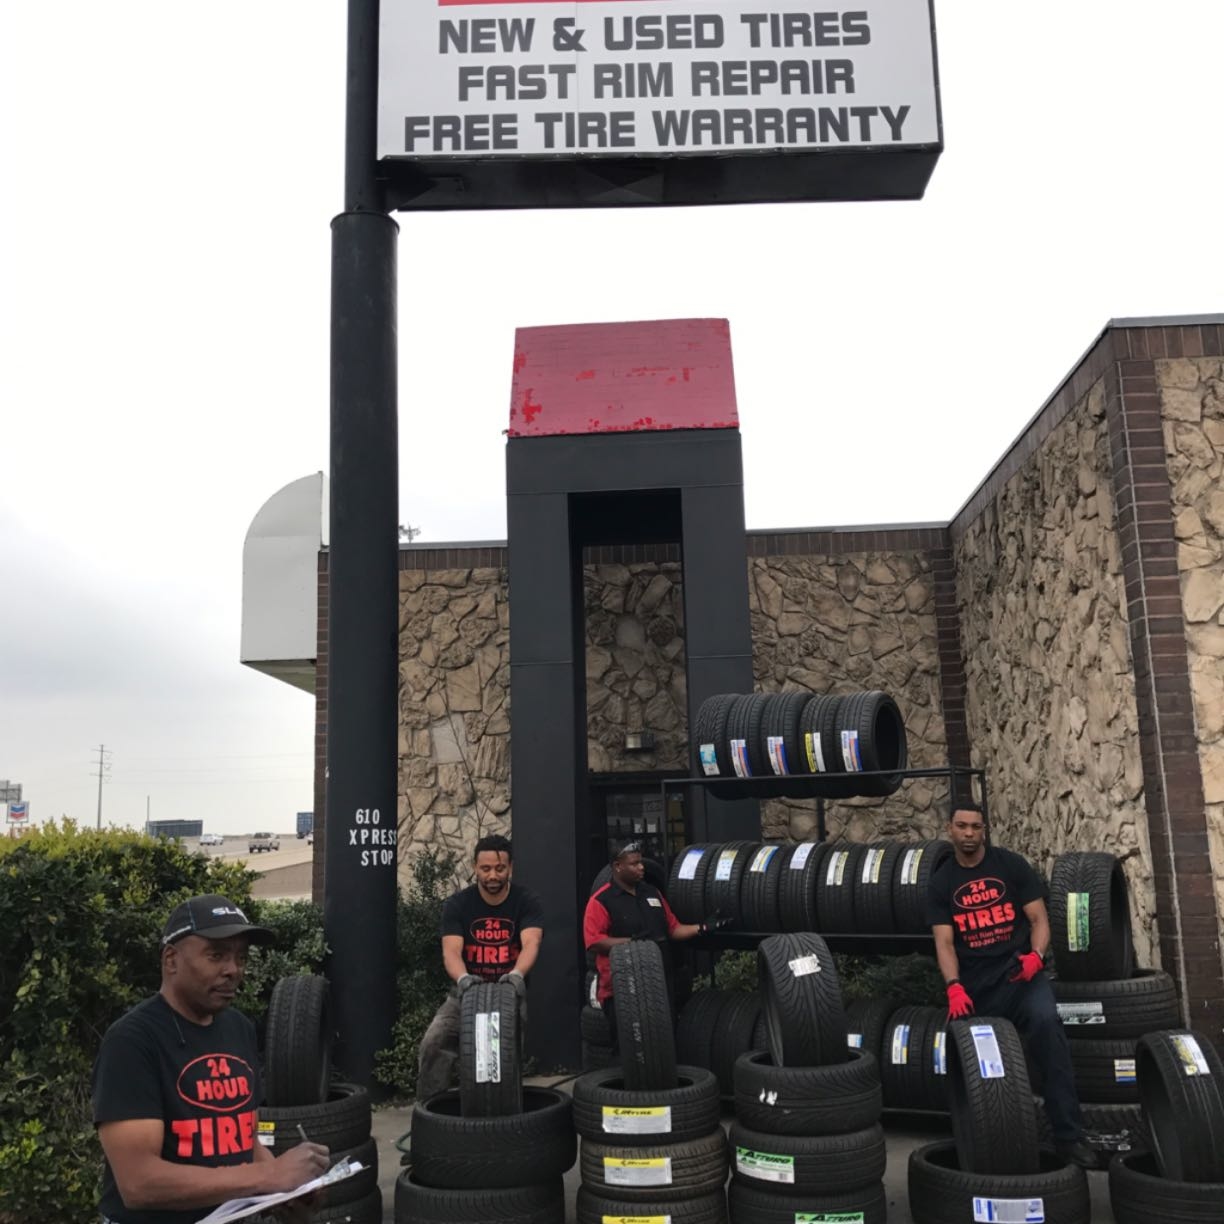 24 Hour Tire Shop Houston in Houston, TX | Whitepages